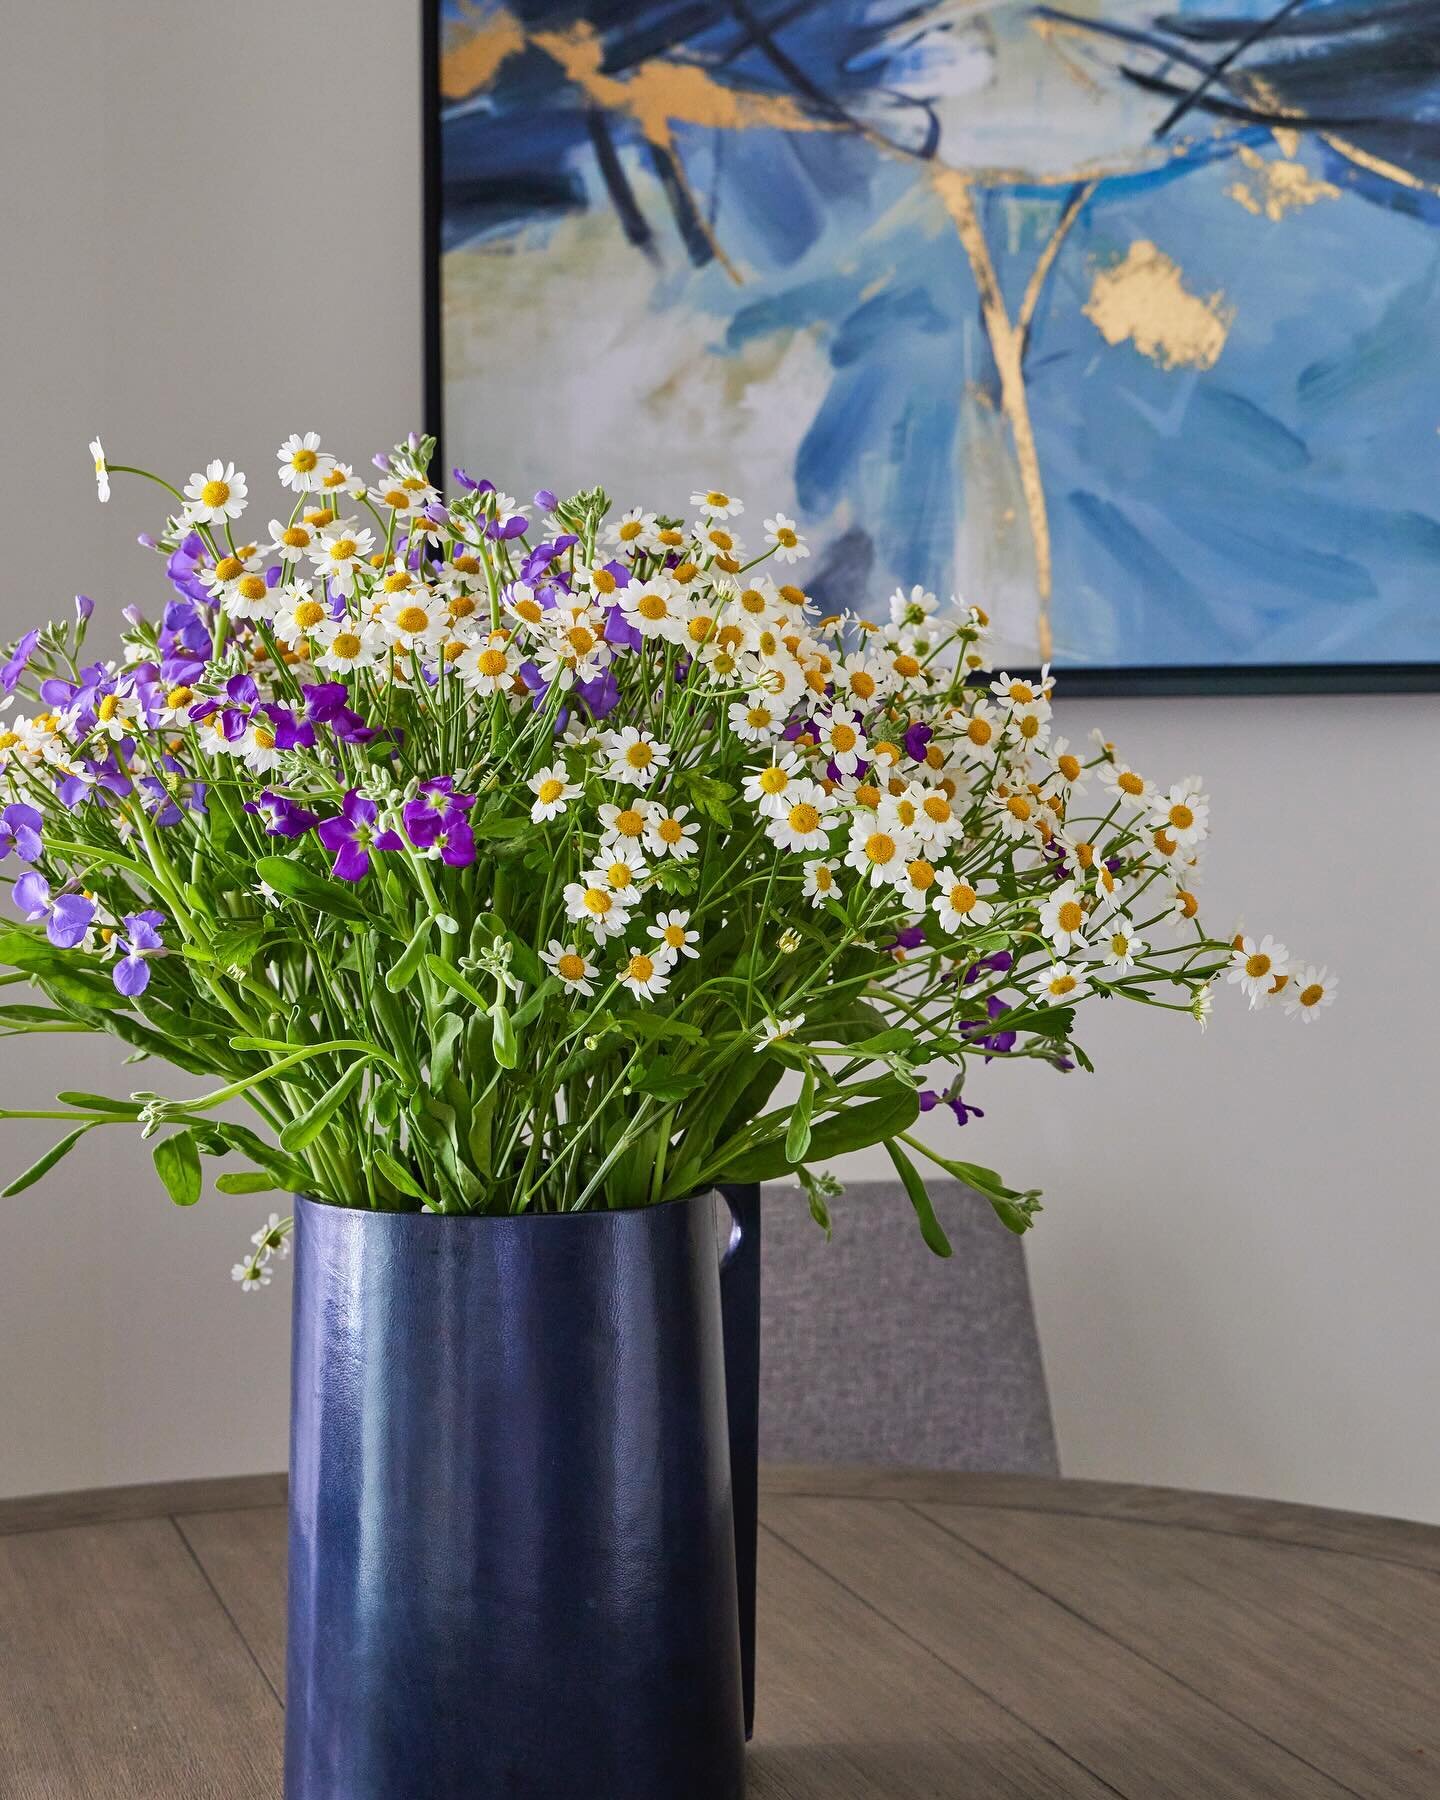 For the love of flowers! Brighten up your life with the beauty of fresh flowers in your home! Not only do they add a touch of elegance and color to your space, but they also bring benefits to your well-being. Studies have shown that having flowers in